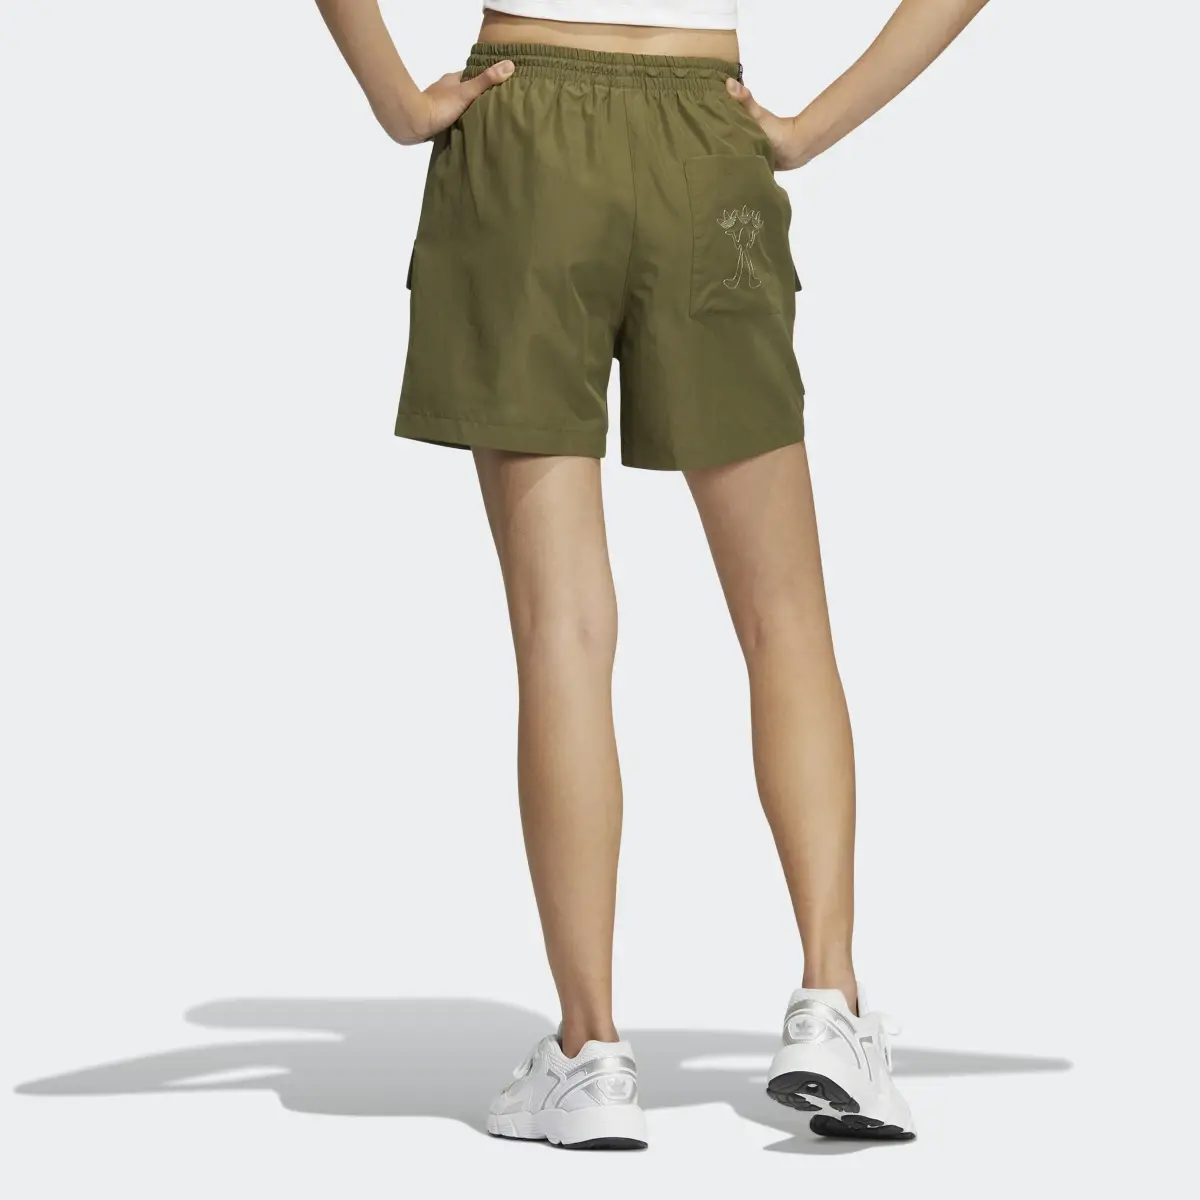 Adidas Outdoor Graphic Shorts. 2